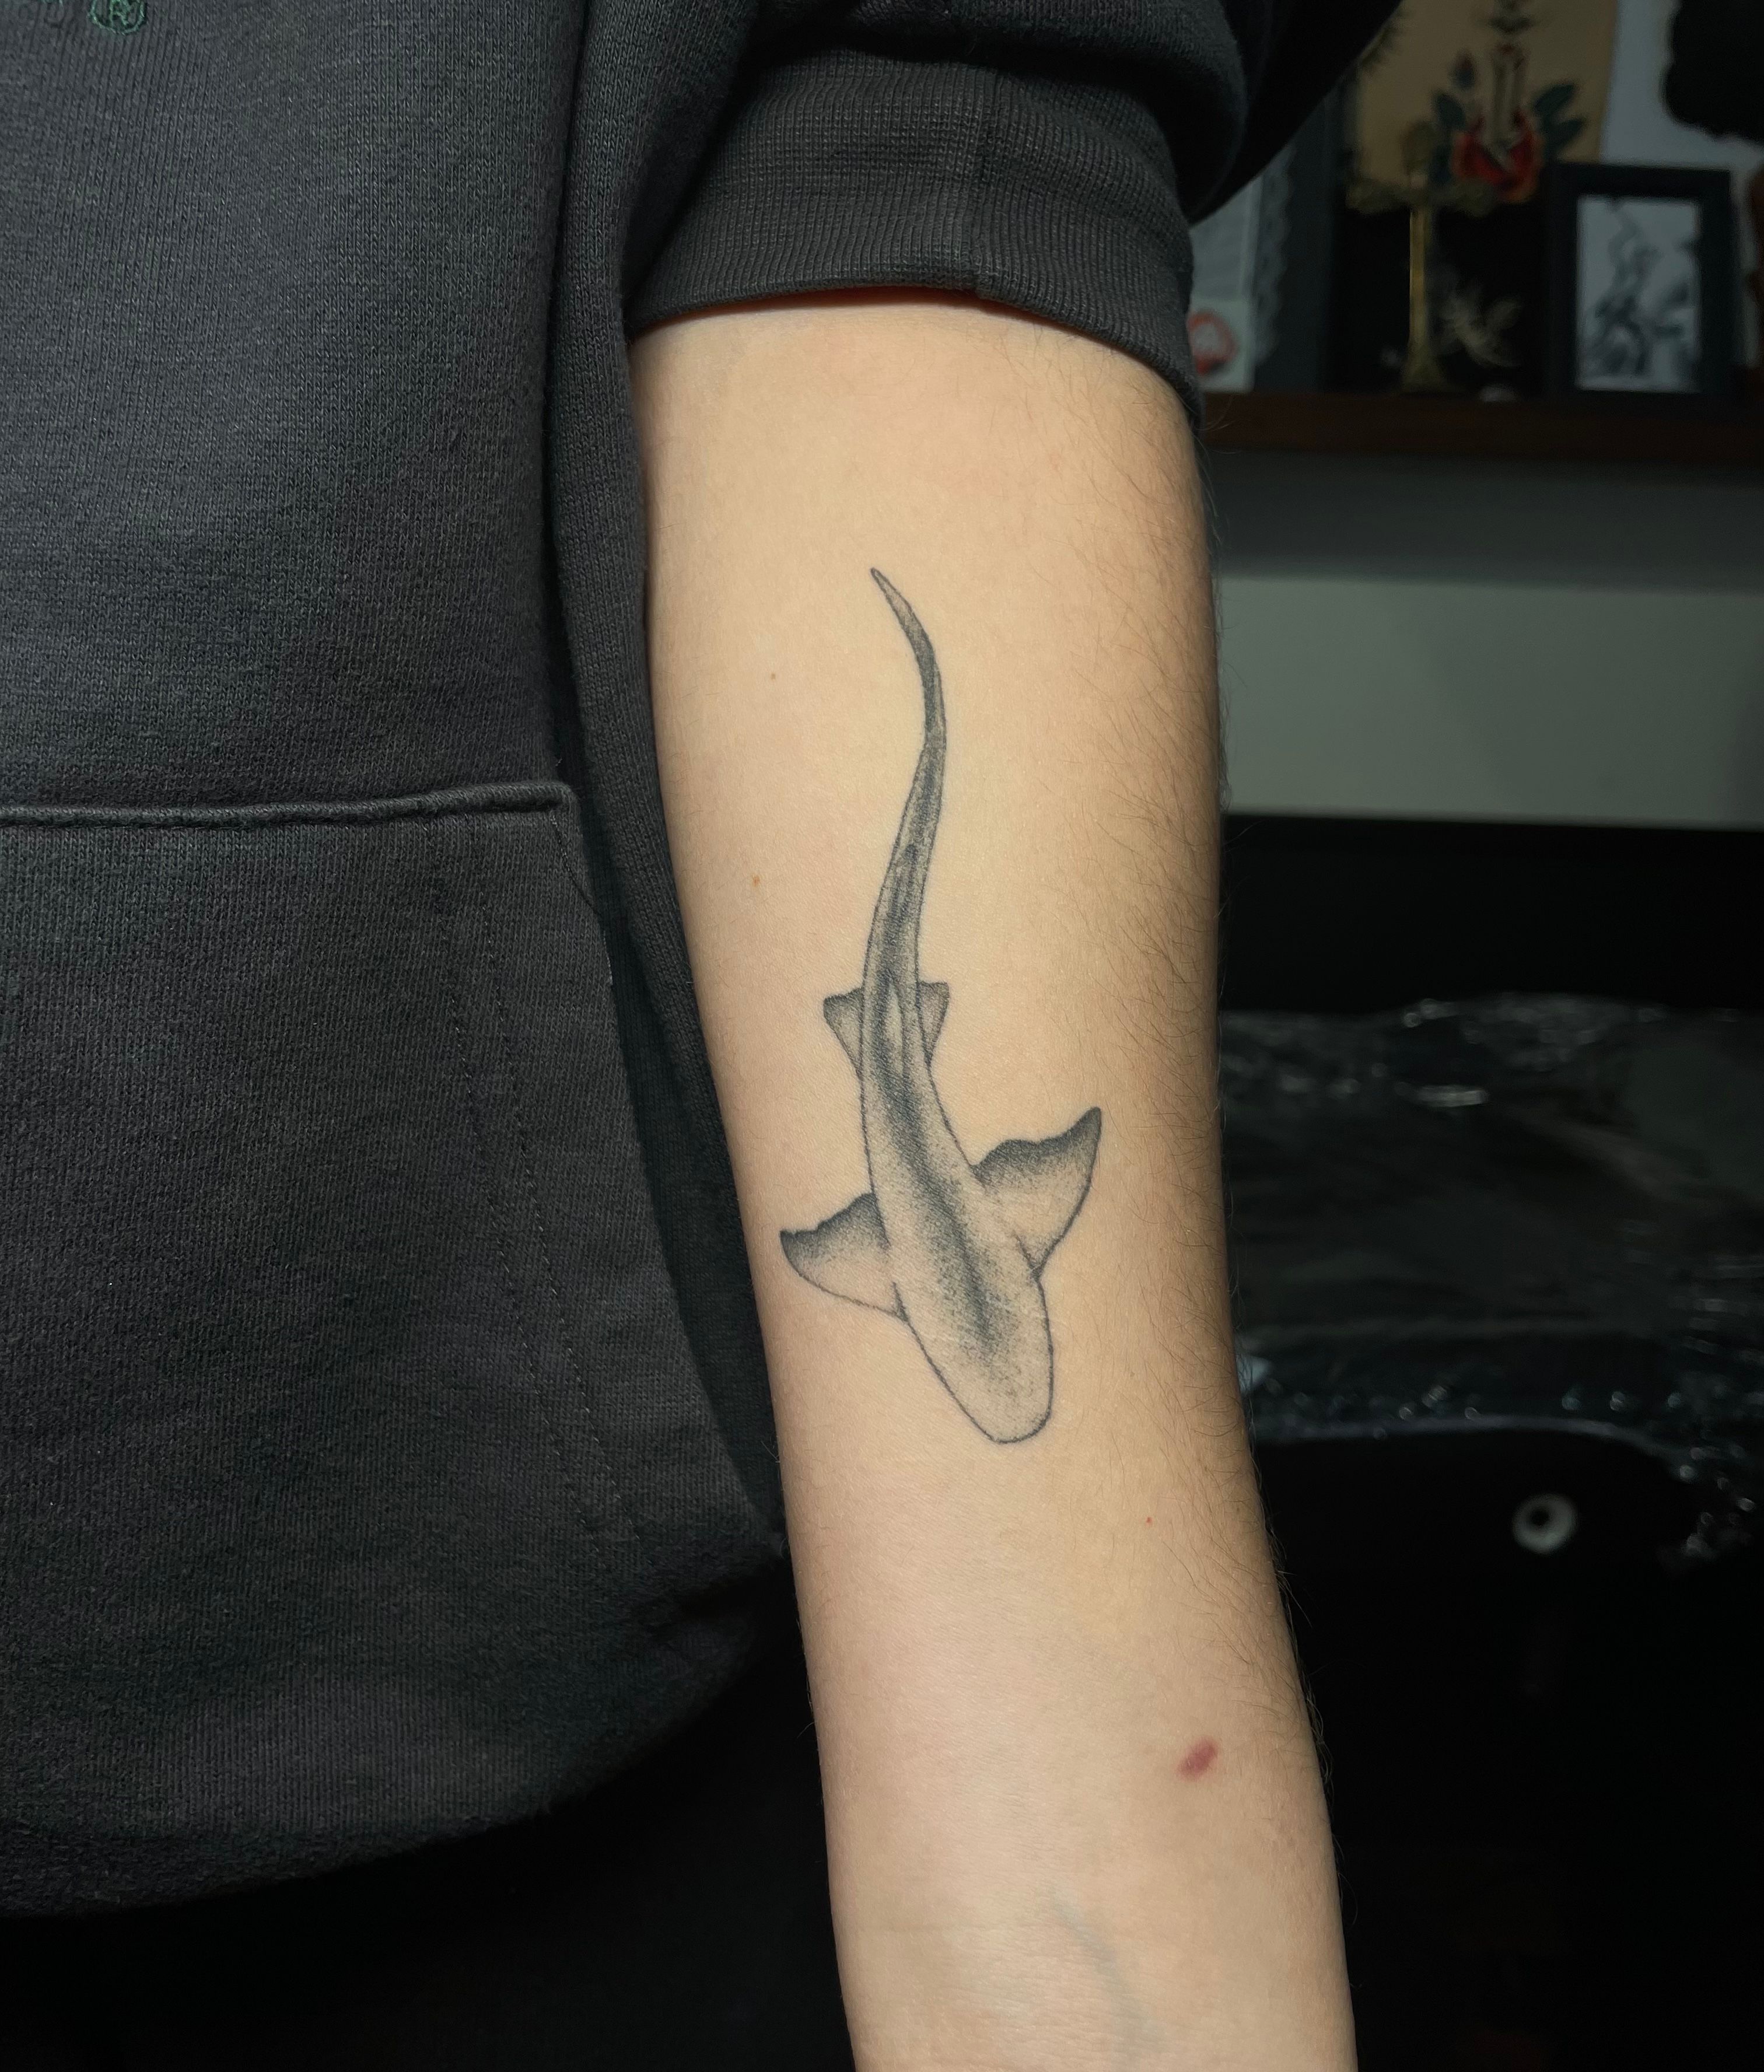 19 Shark Tattoo Ideas To Inspire Your Next Ink • Wild Hearted